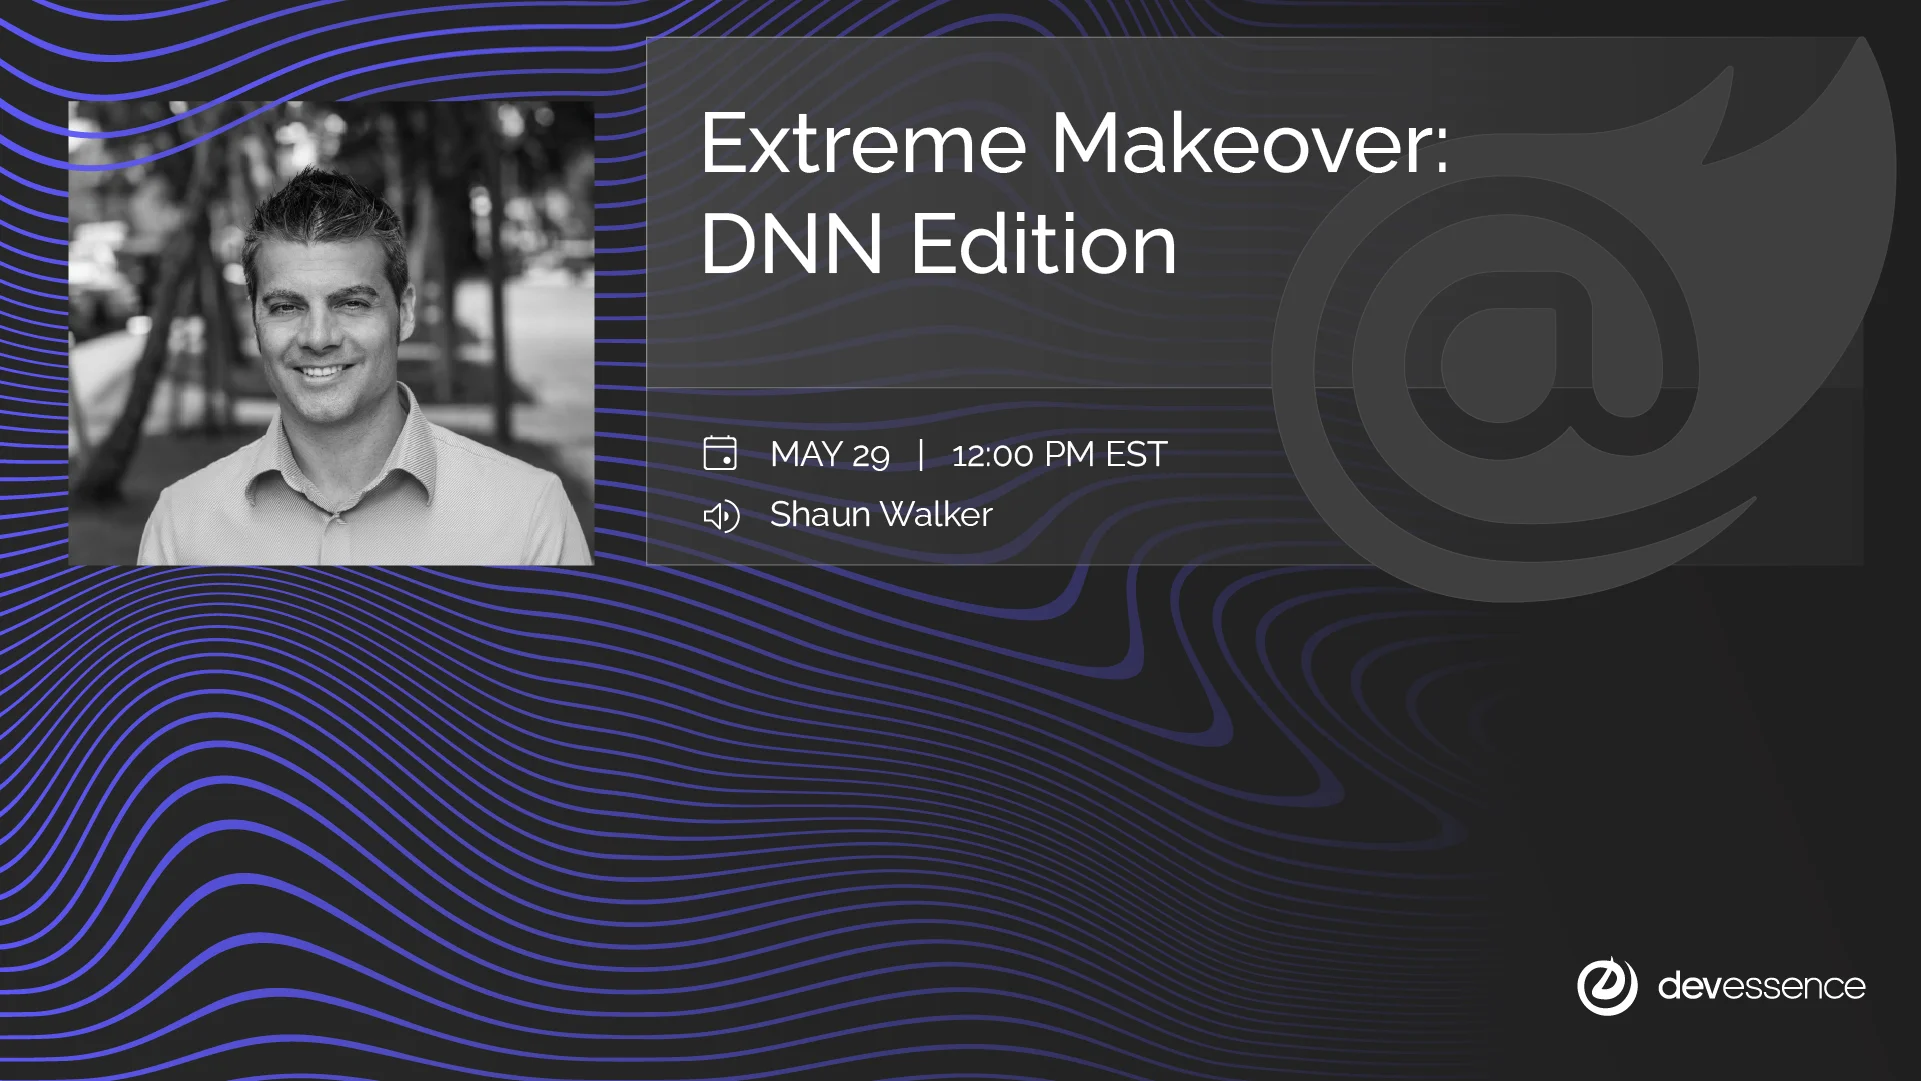 Extreme Makeover- DNN Edition 1920x1080.webp